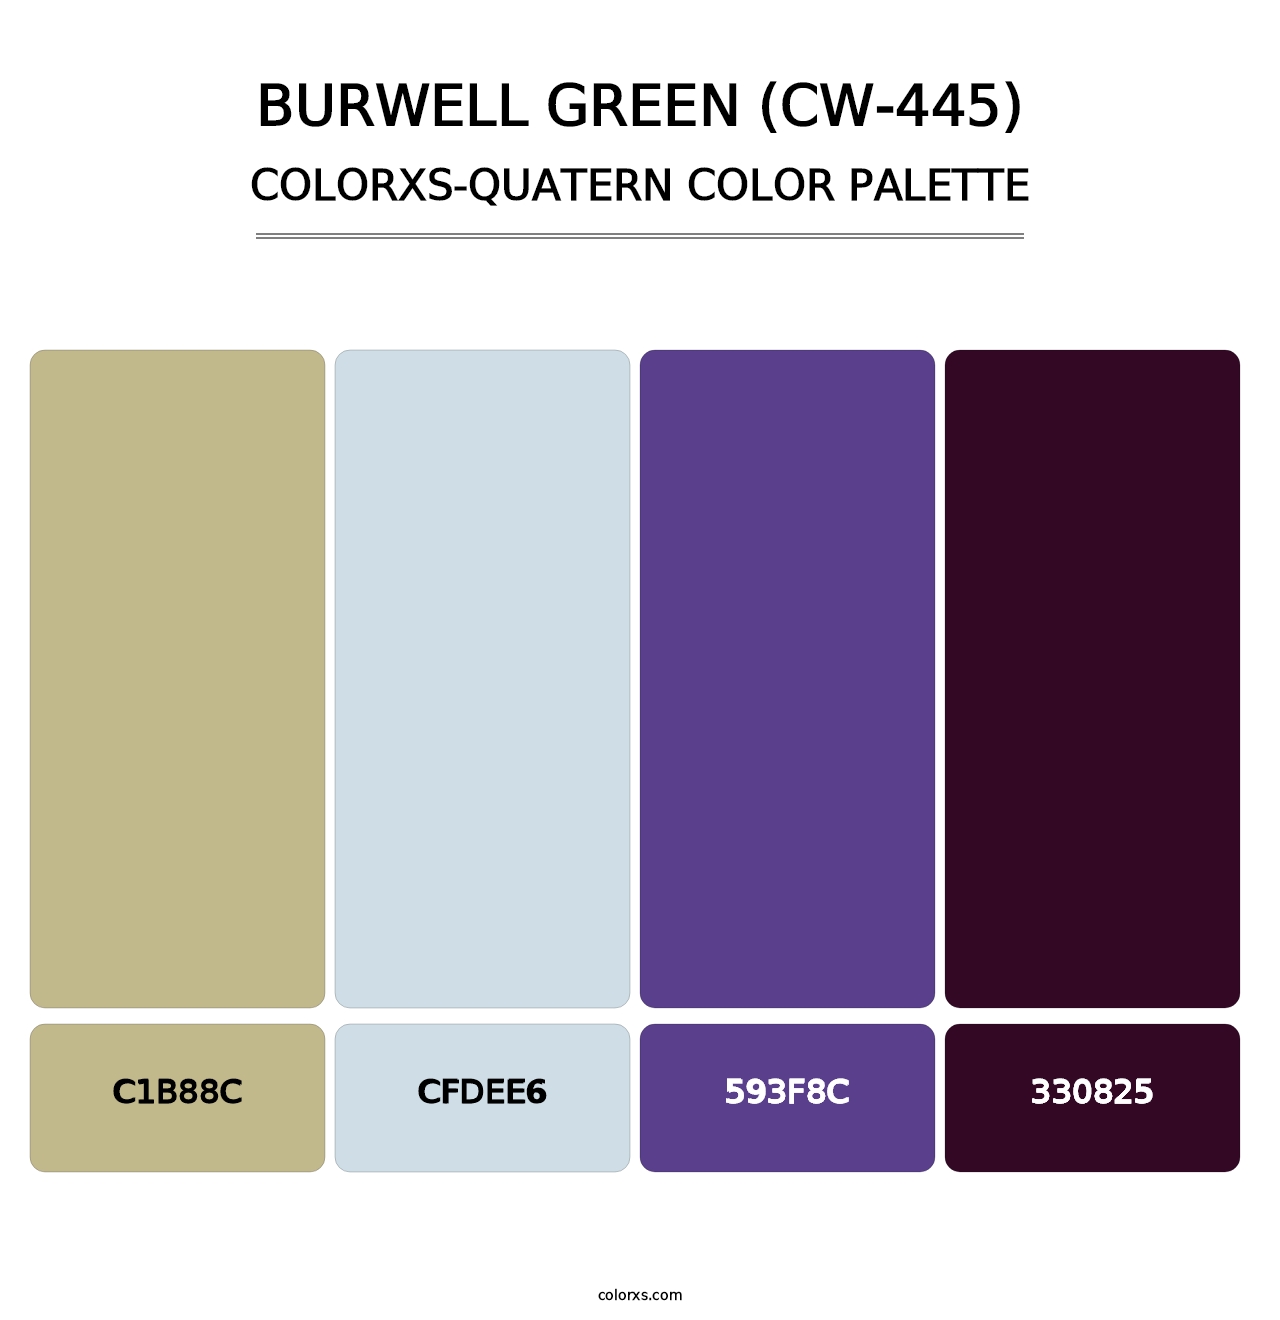 Burwell Green (CW-445) - Colorxs Quatern Palette